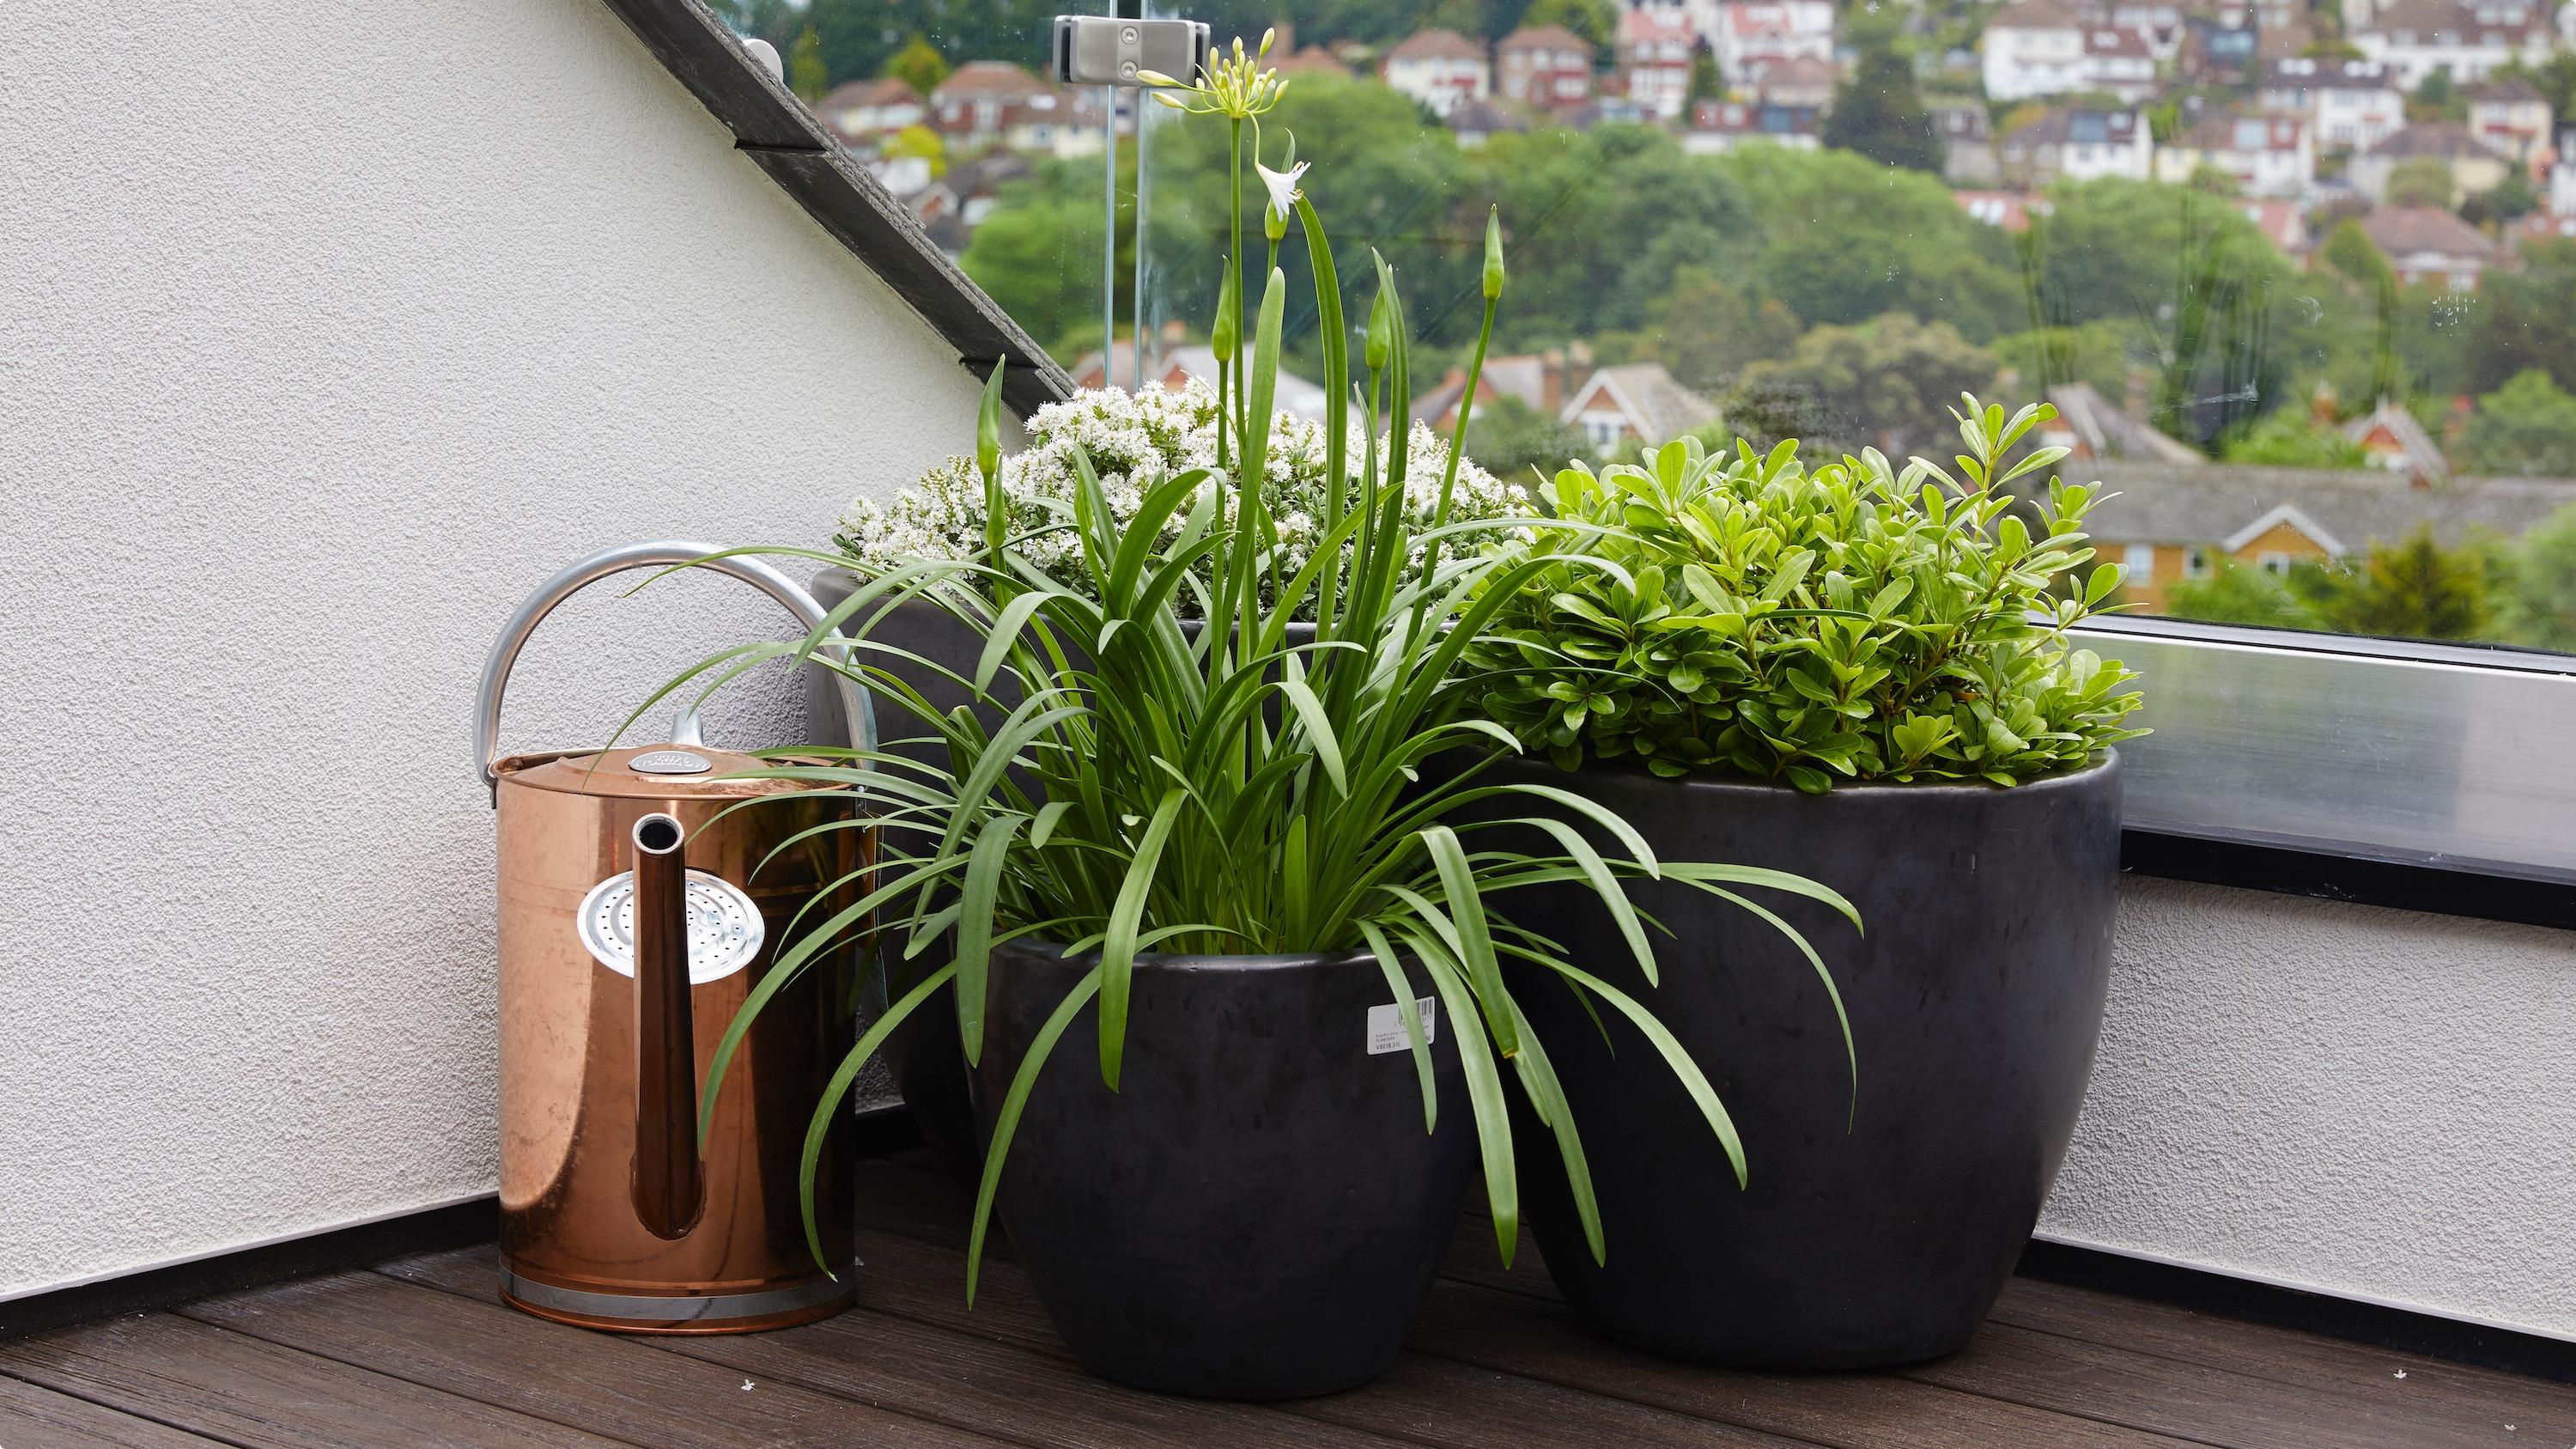 Planters on a roof terrace / balcony